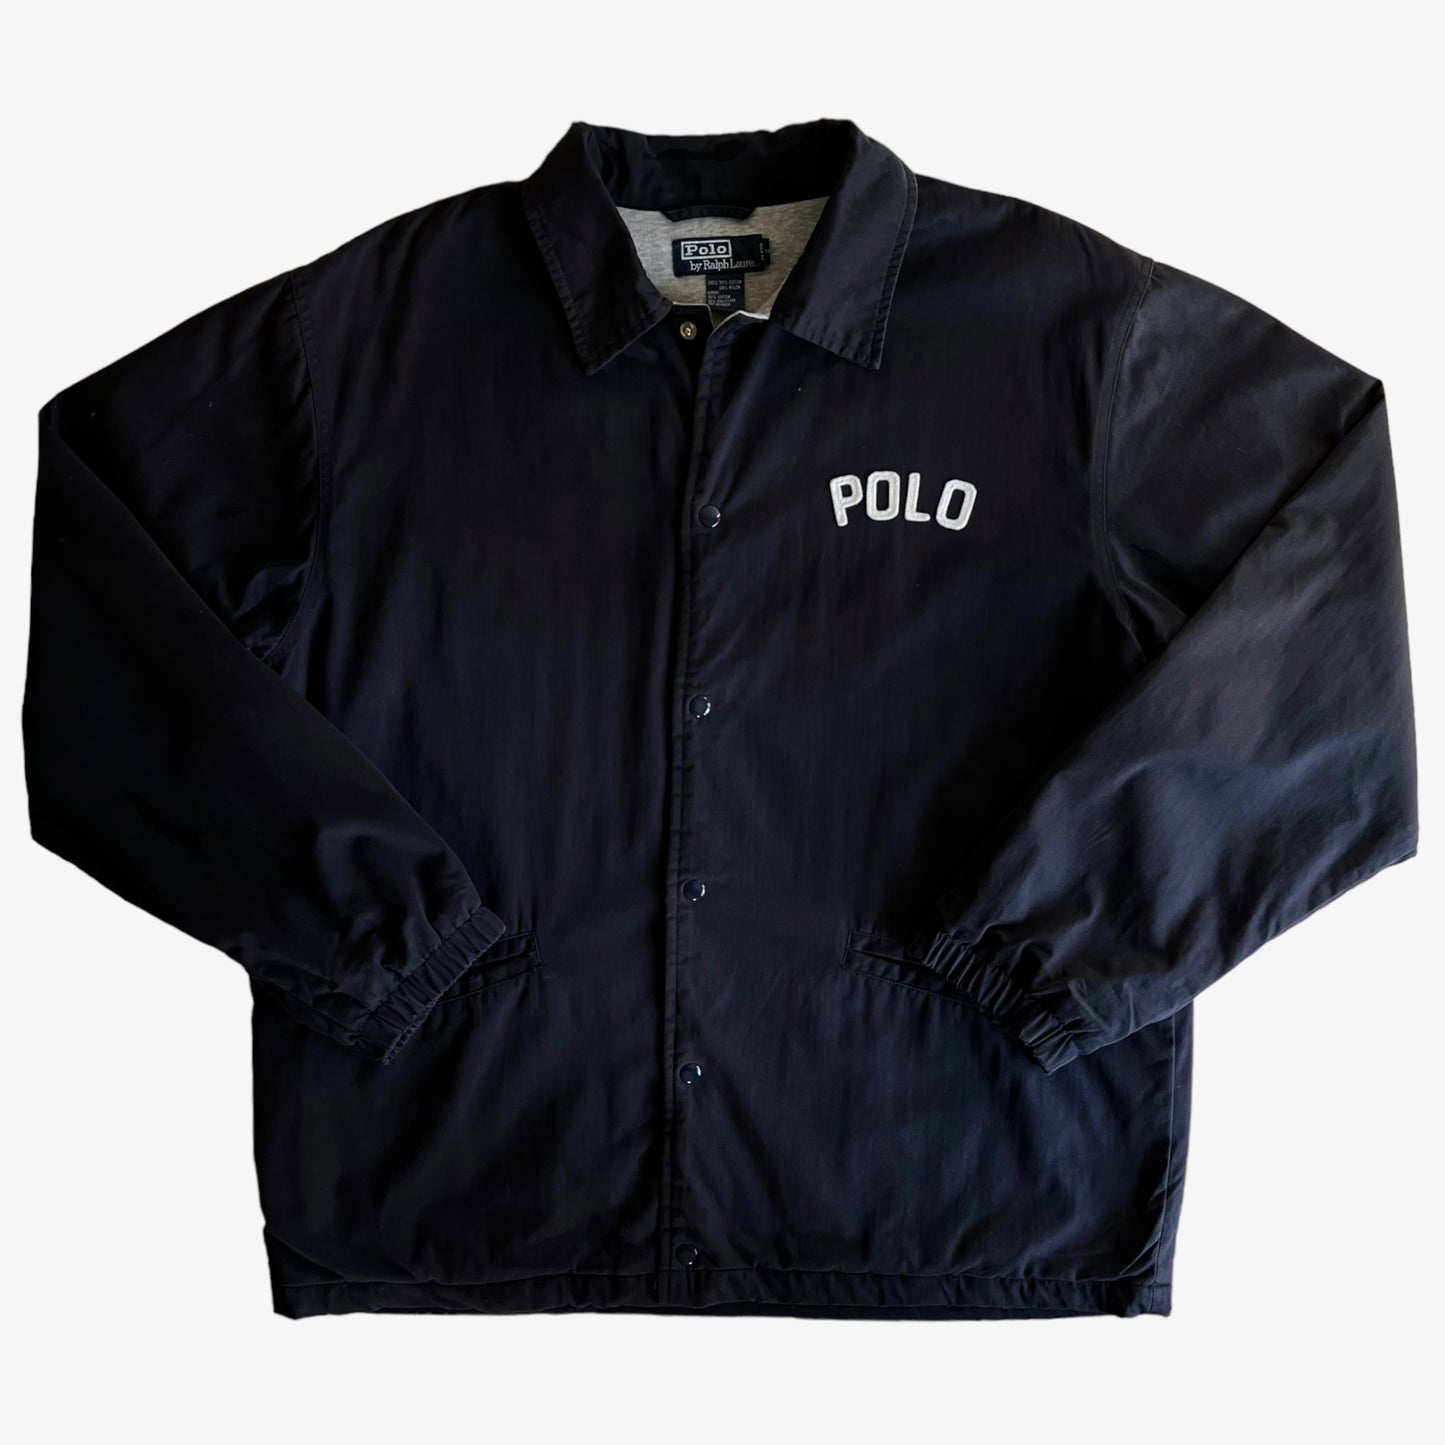 Vintage Y2K Polo Ralph Lauren Jacket With Spell Out Breast Logo - Casspios Dream